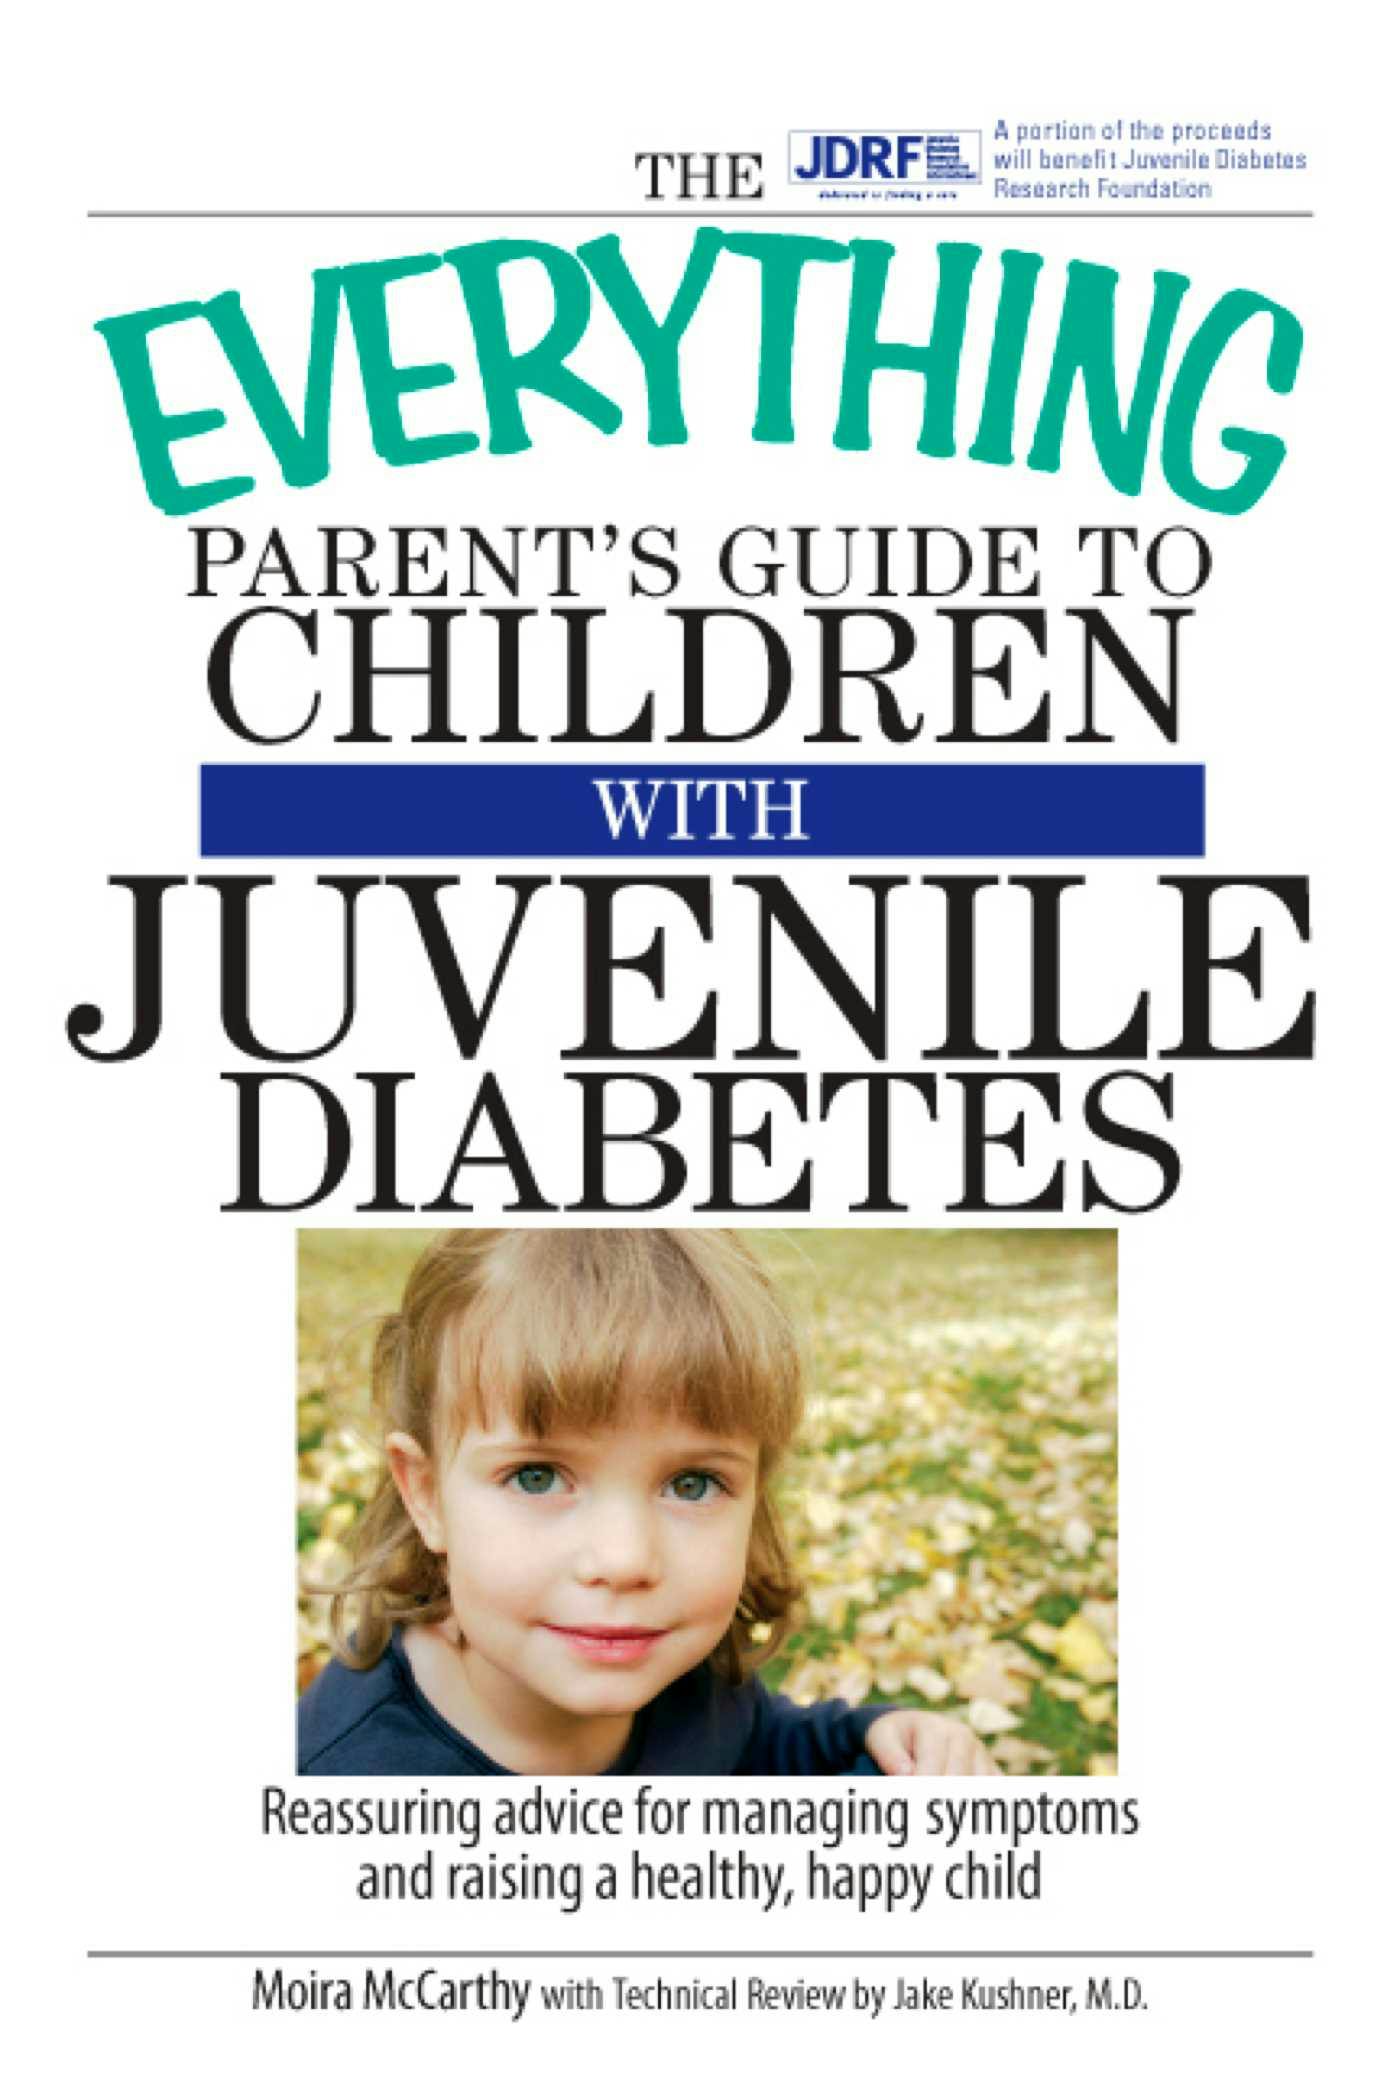 The Everything Parent's Guide To Children With Juvenile Diabetes: Reassuring Advice for Managing Symptoms and Raising a Happy, Healthy Child - Moira McCarthy, Jake Kushner